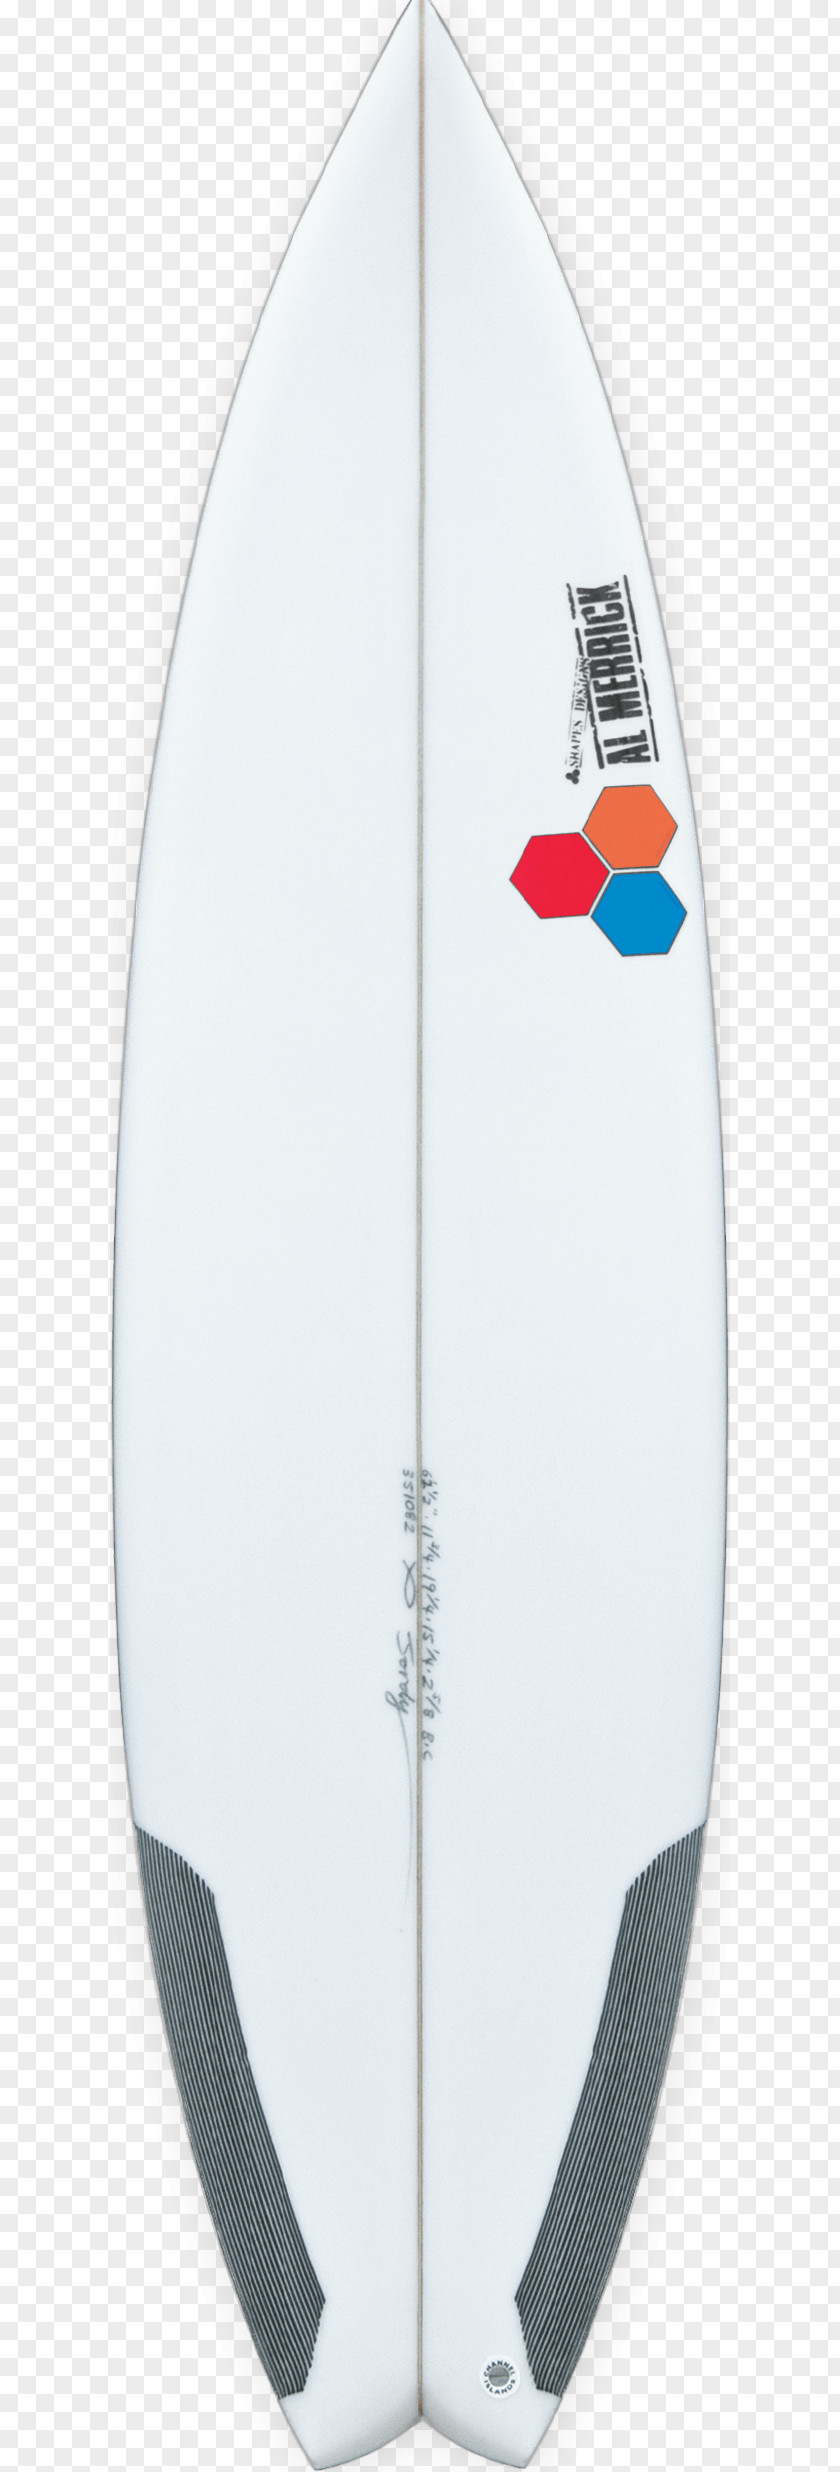 Design Surfboard Channel Islands Quiksilver Bunny Chow PNG